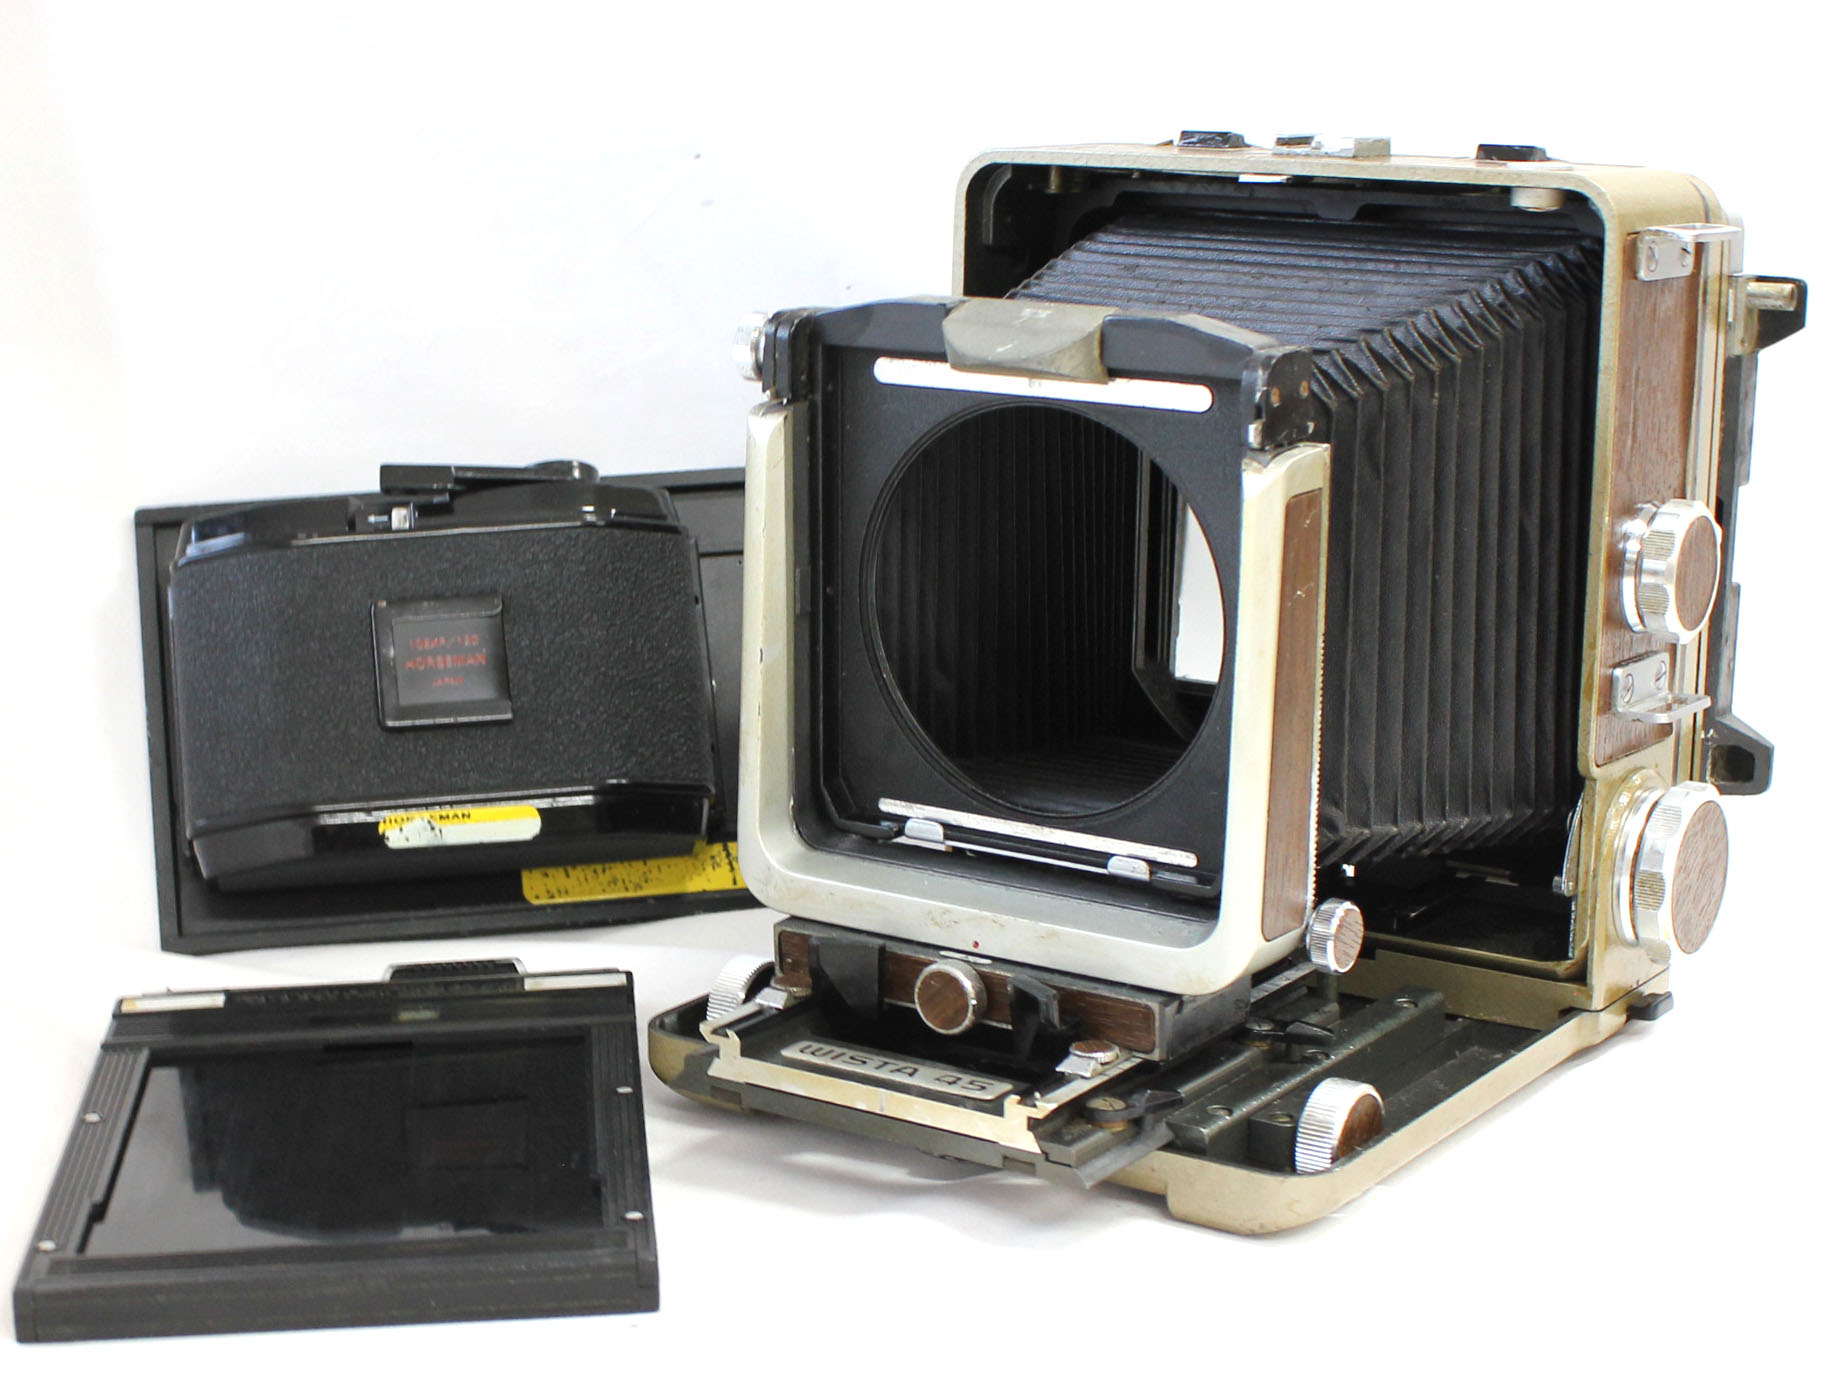 Wista 45 45D 4x5 Large Format Camera with Horseman 10EXP/120 6x7 Roll Film Back Holder & Toyo 4x5 Cut Film Holder from Japan